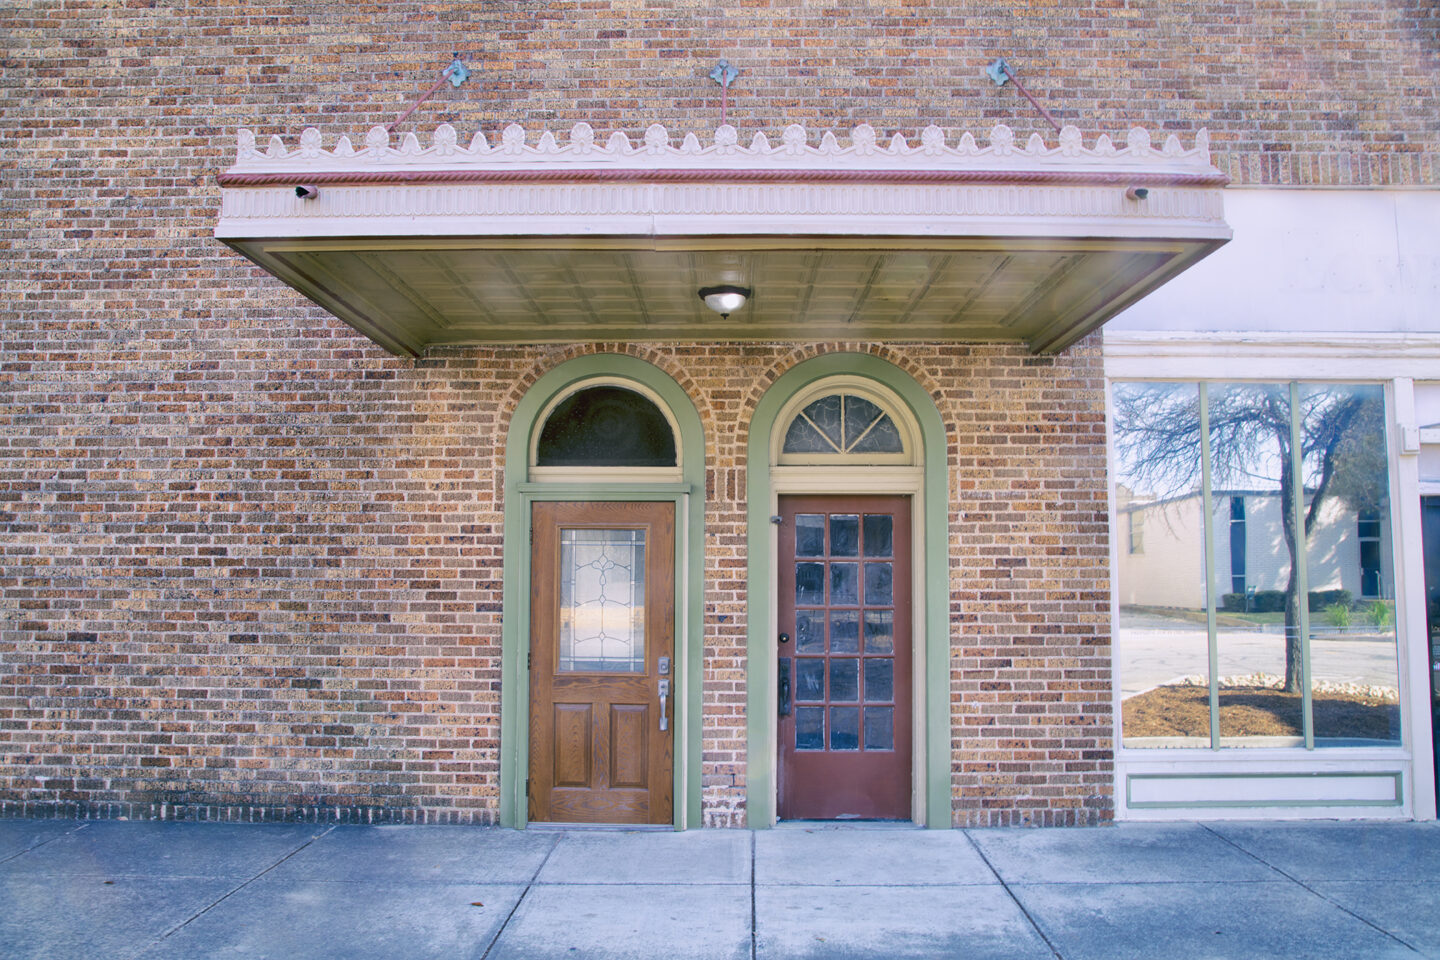 Two doors under an overhang mark the entrance to an historic building in downtown Taylor, Texas, USA 